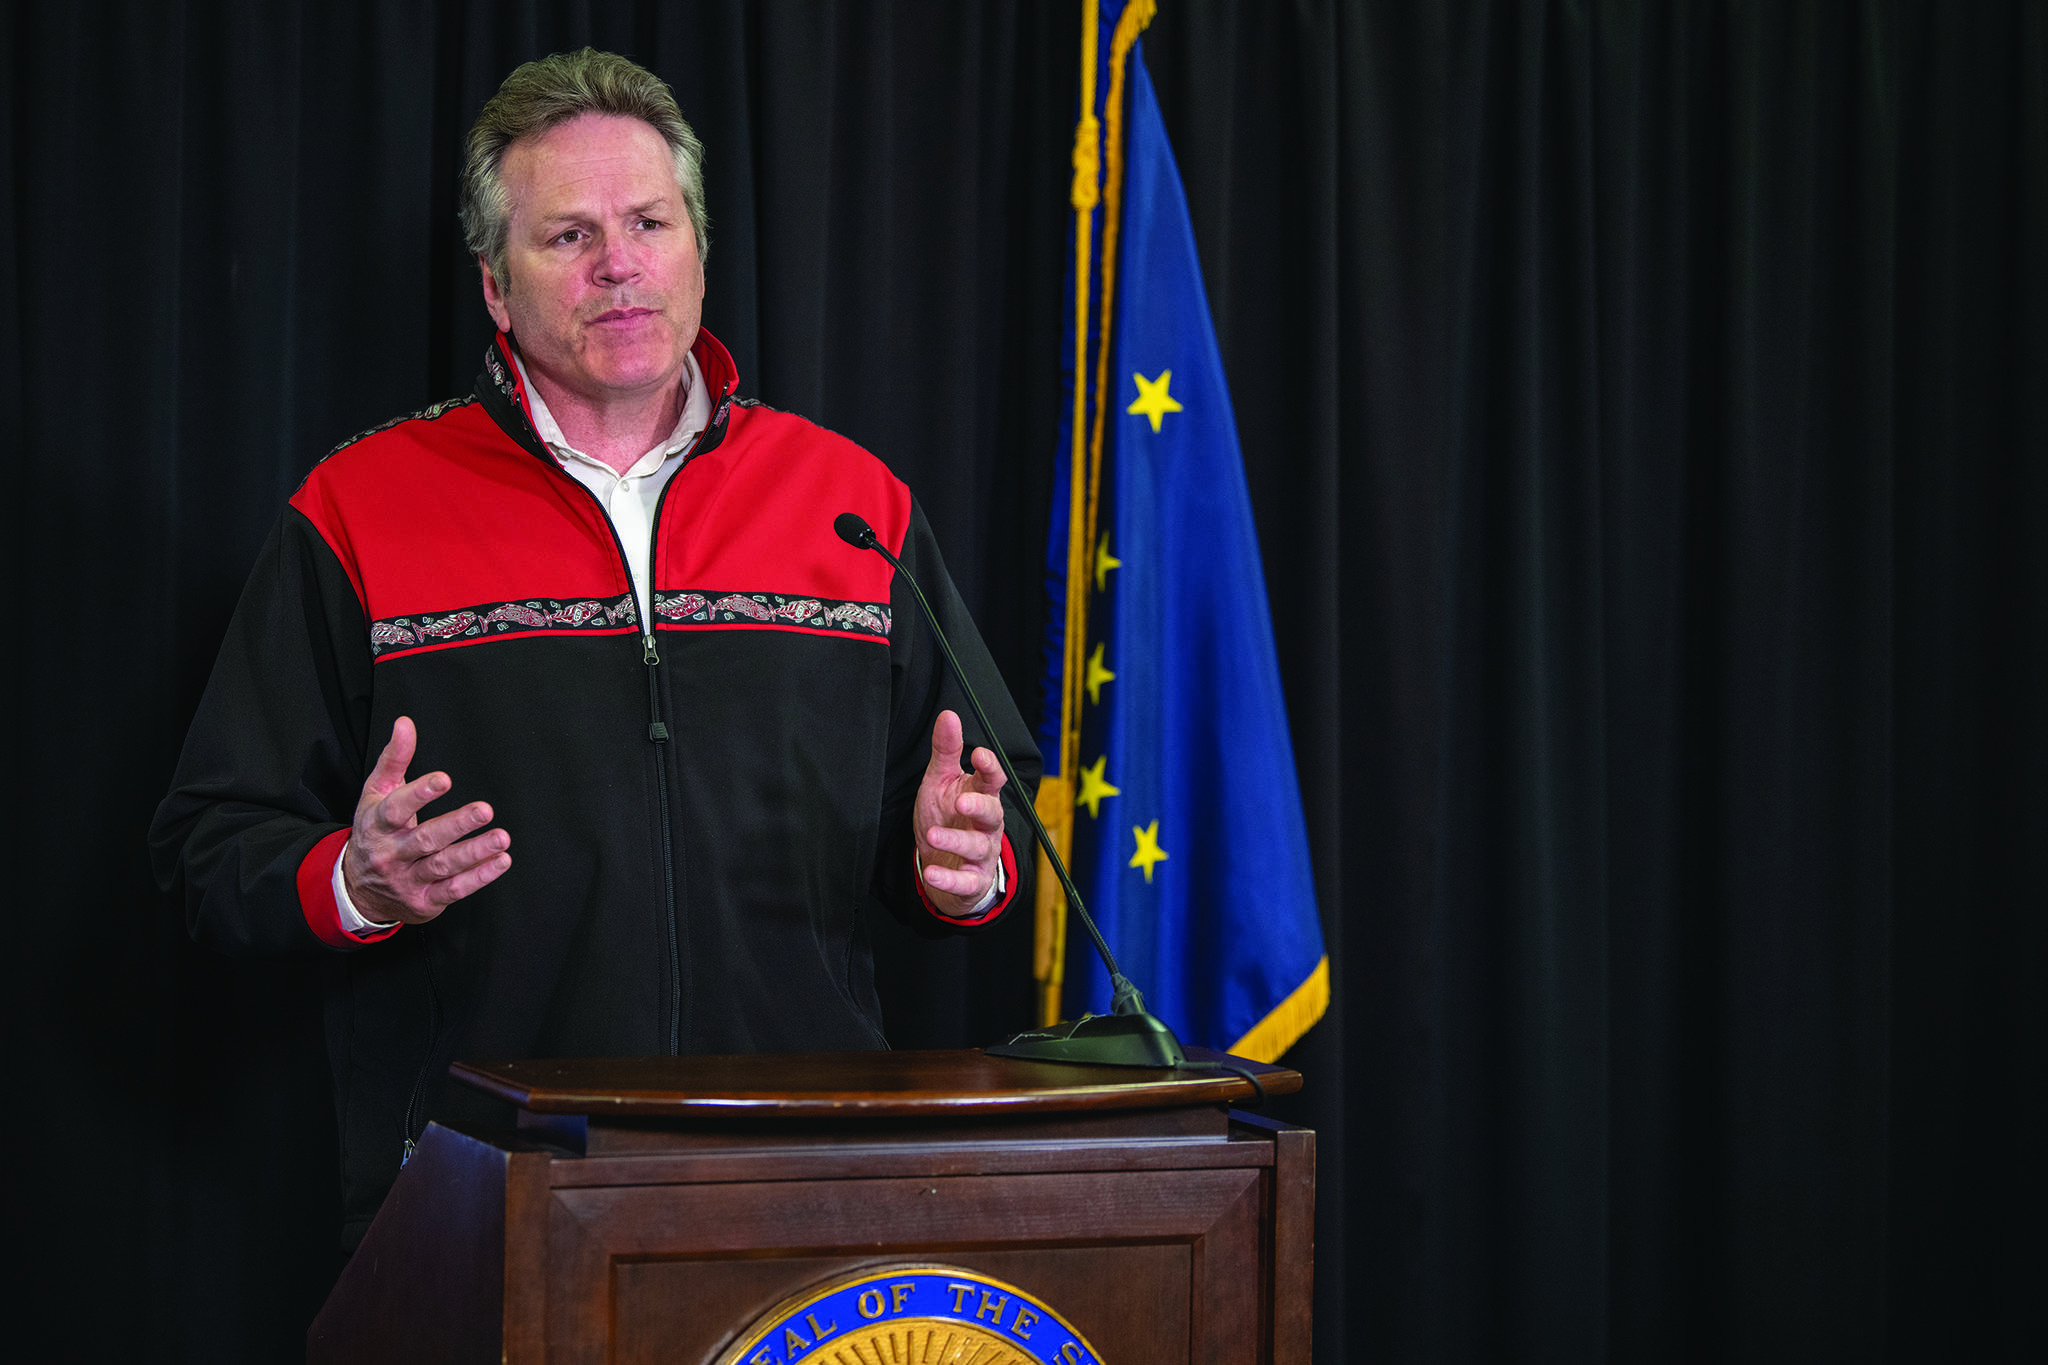 Gov. Mike Dunleavy speaks at a press conference on May 11, 2020, in the Atwood Building in Anchorage, Alaska. (Photo by Austin McDaniel courtesy Office of the Governor)